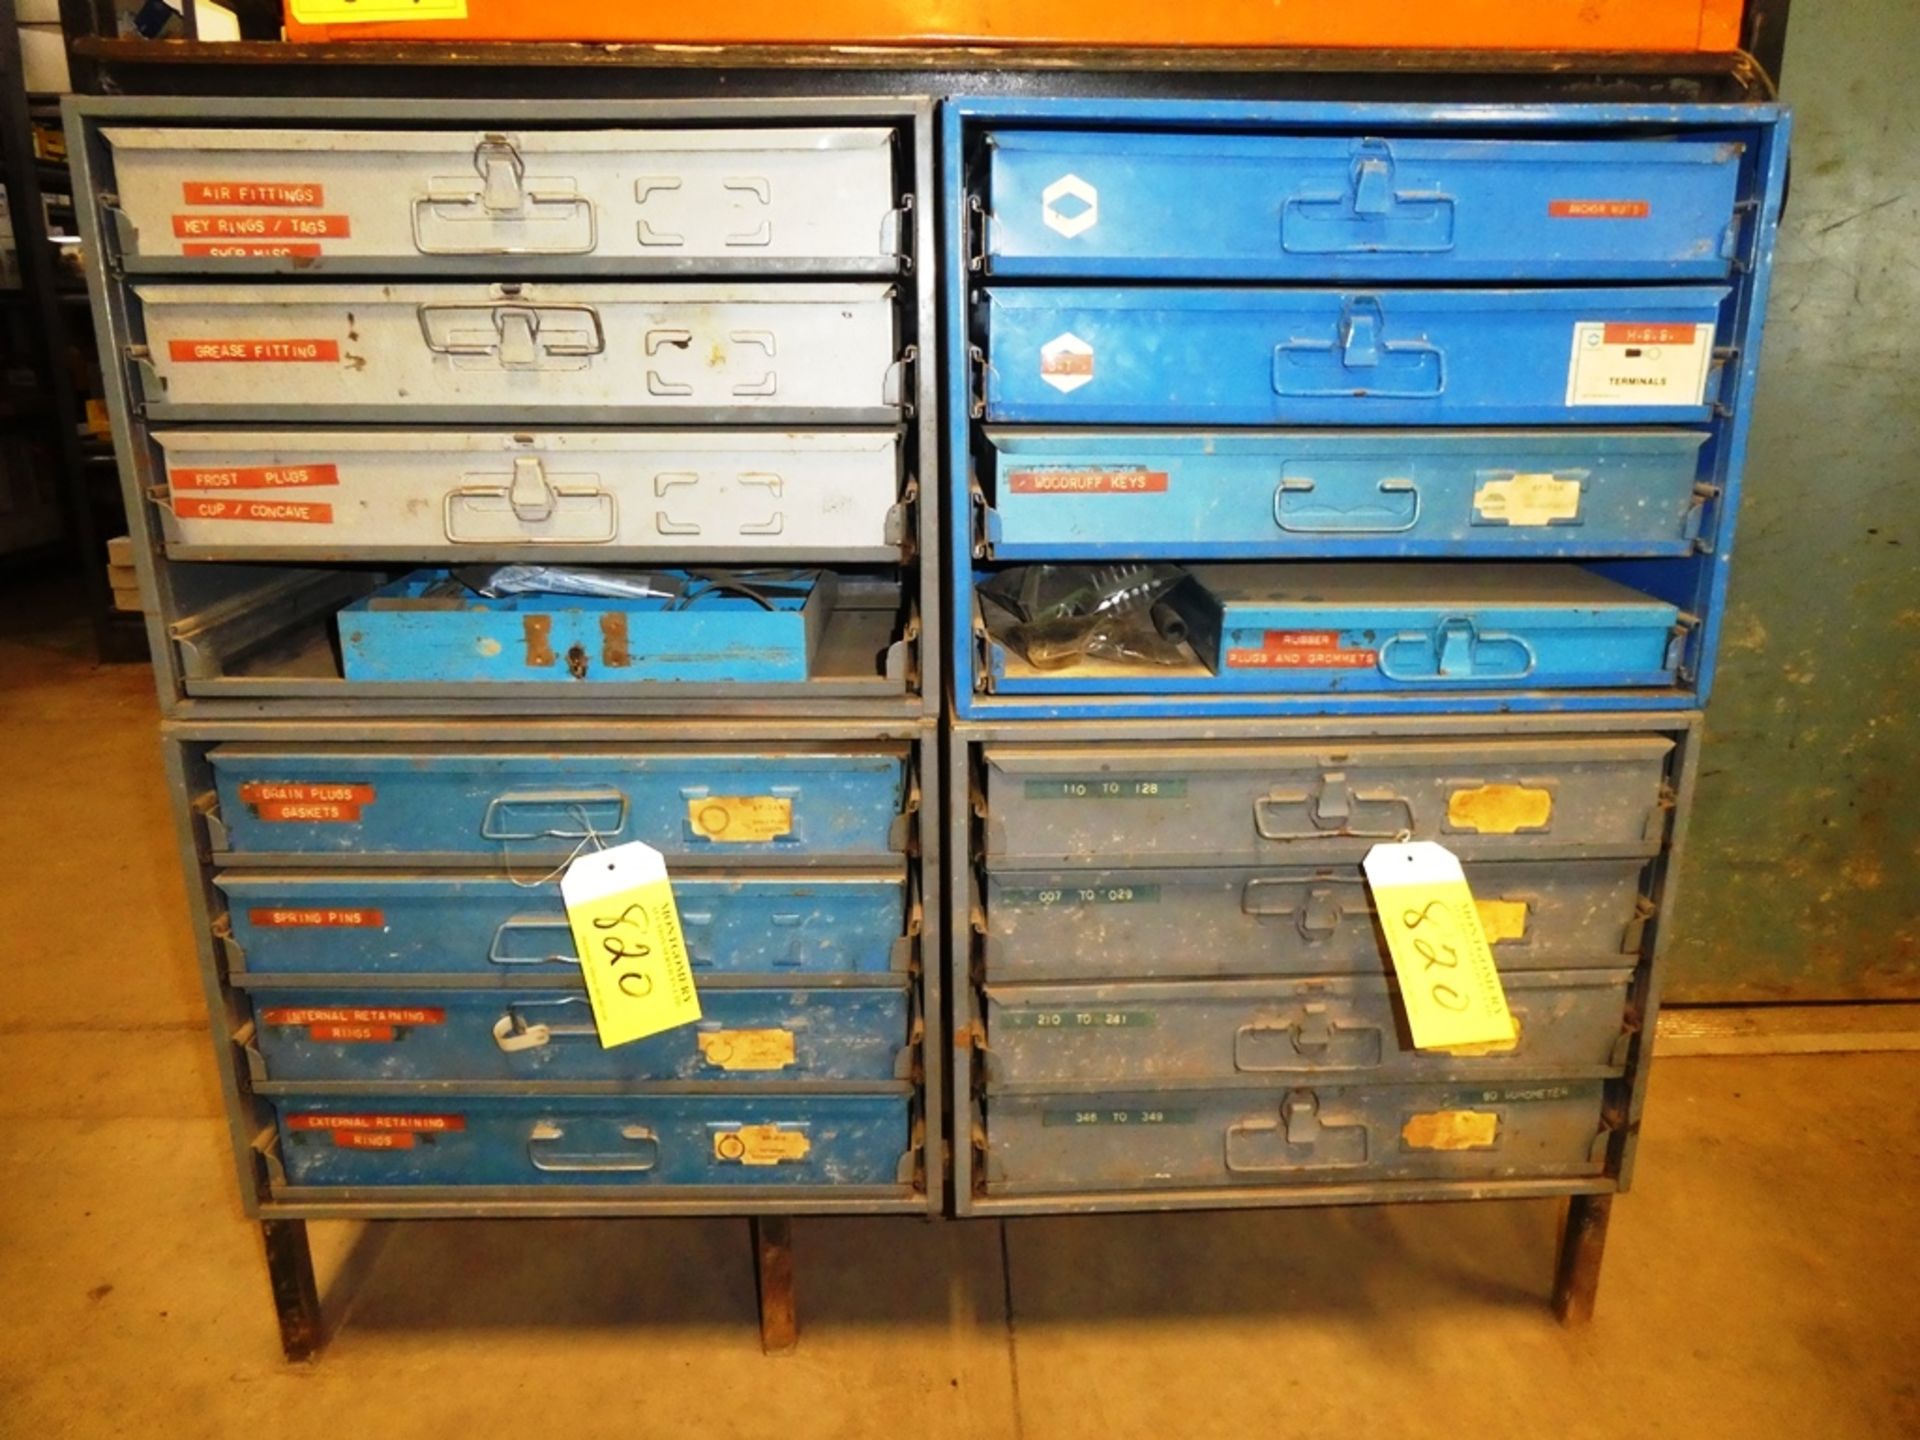 STORAGE DRAWERS W/ 15 DRAWERS & CONTENTS AIR FITTINGS, GASKETS, GREASE FITTINGS, DRAIN PLUGS, O-